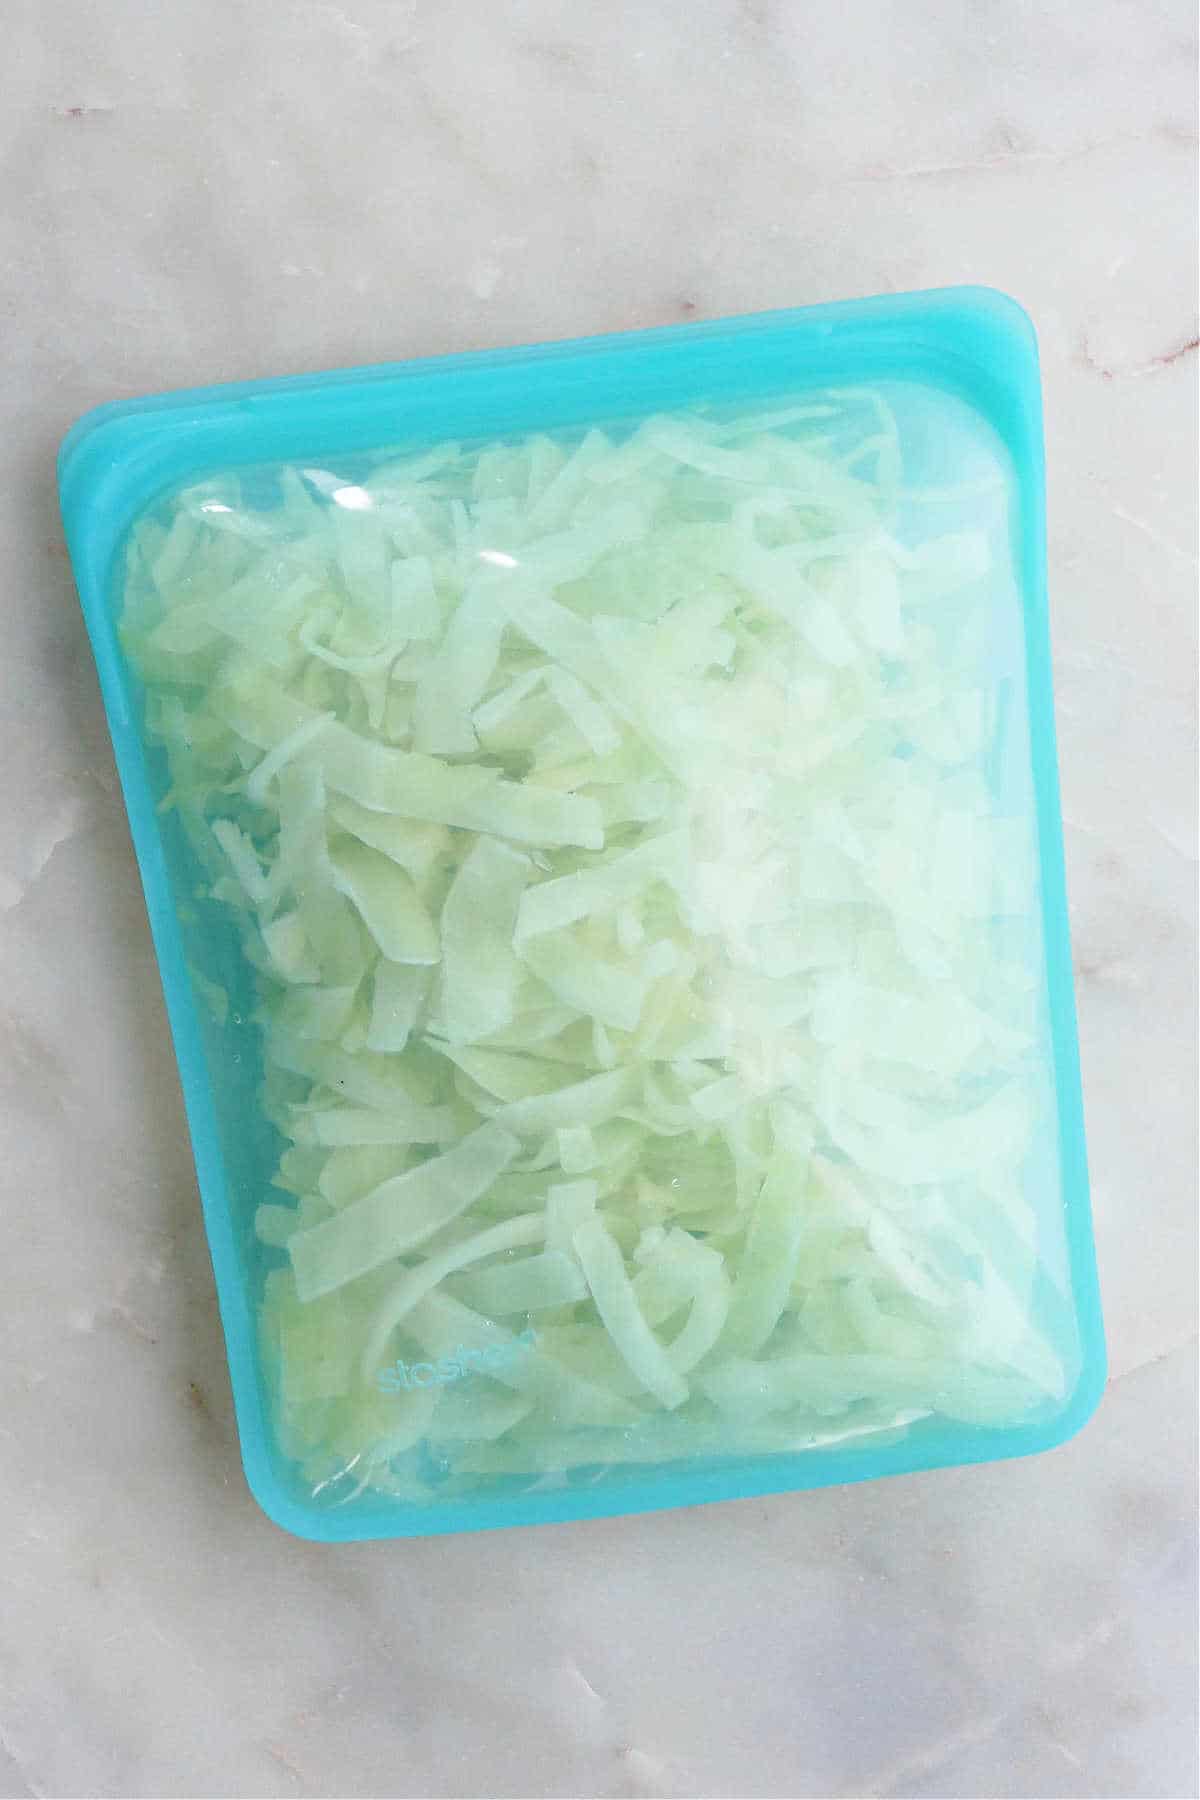 shredded cabbage in a freezer bag on a counter before going into the freezer